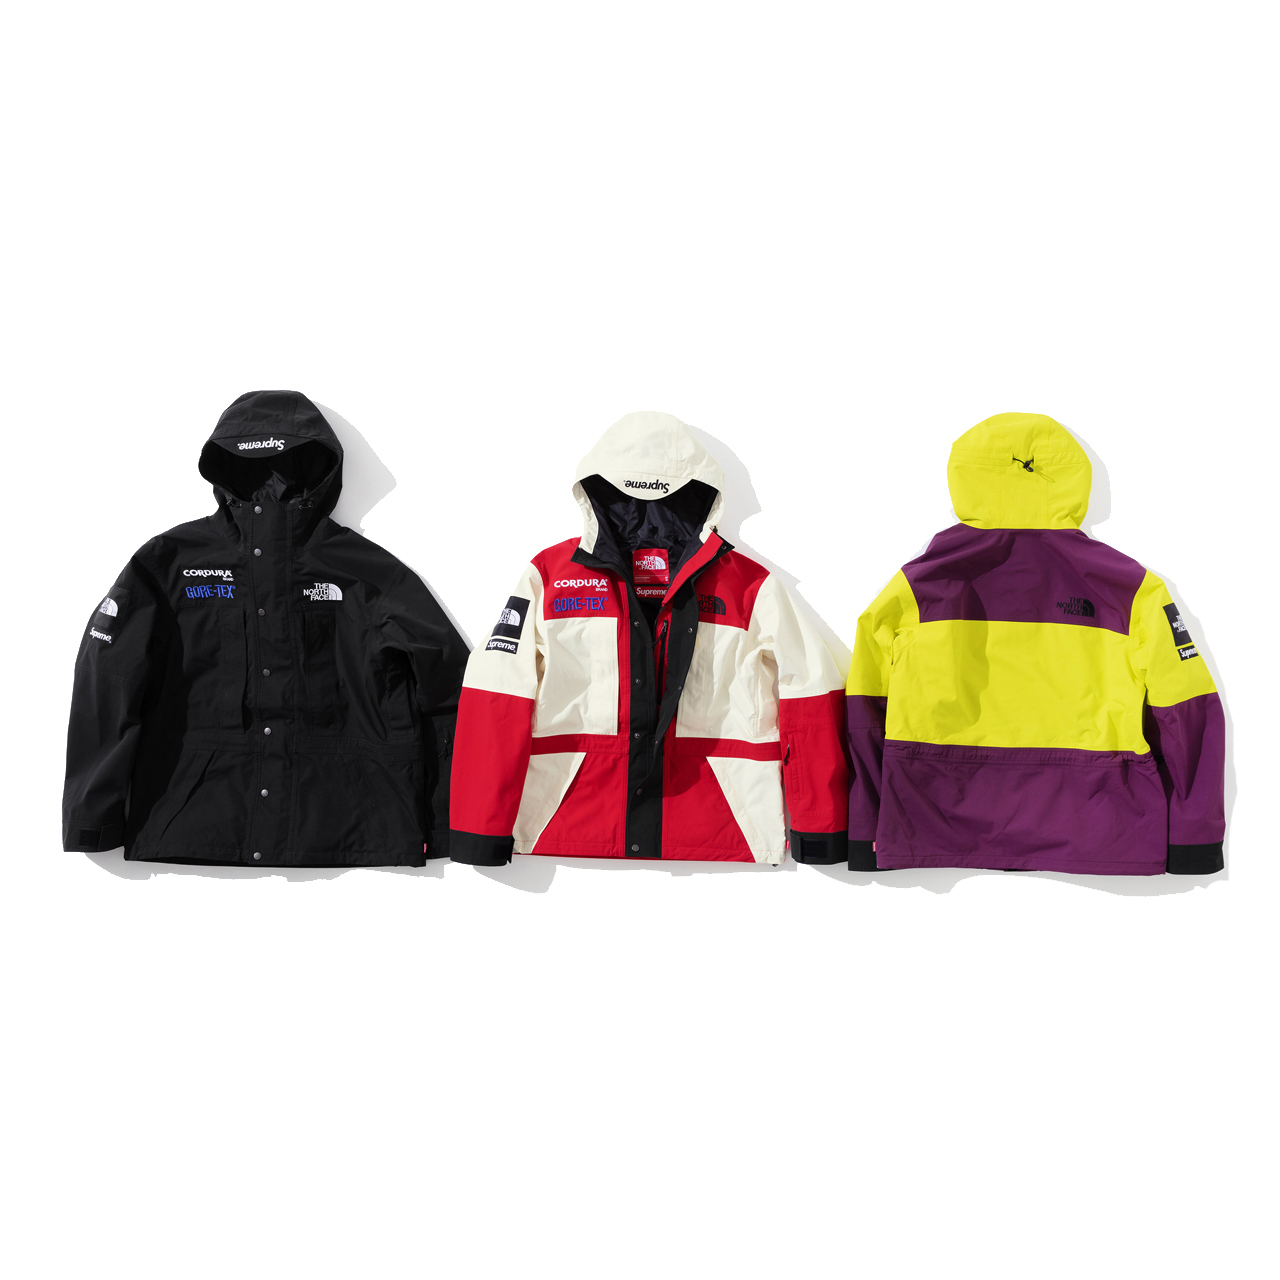 Supreme/The North Face Expedition Jacket 絨毛連帽外套黑-FW18